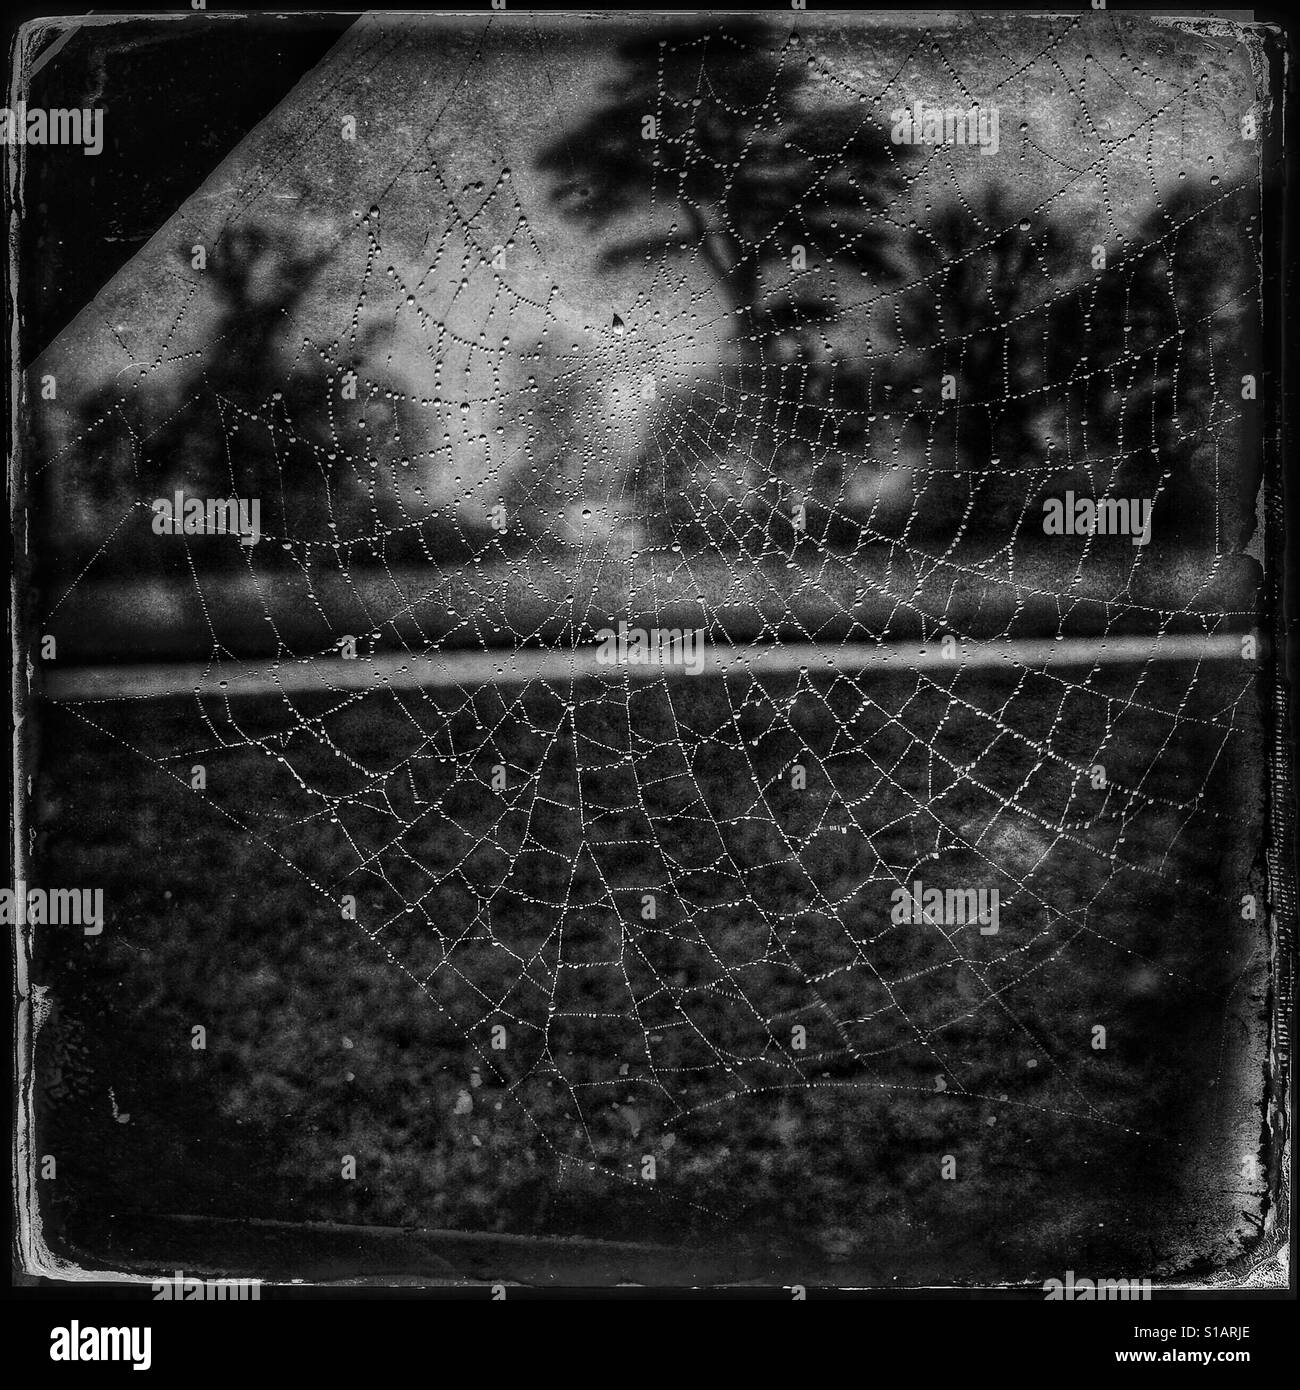 Black and white photo of a dark and spooky scene with a spider web jewelled with droplets of rain, with mysterious looking trees in the background. Stock Photo